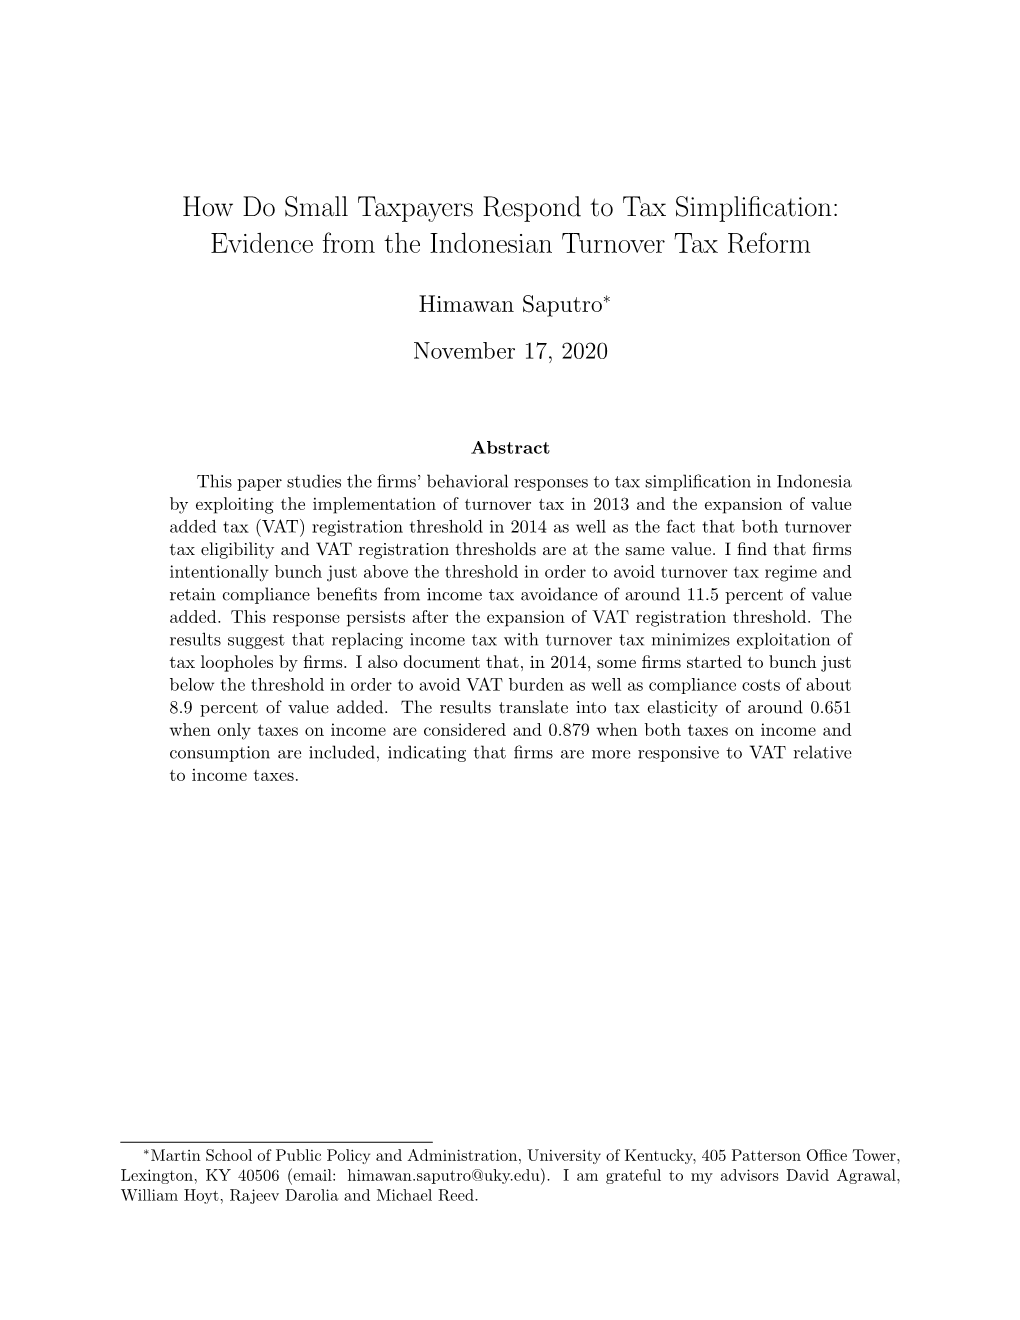 How Do Small Taxpayers Respond to Tax Simplification